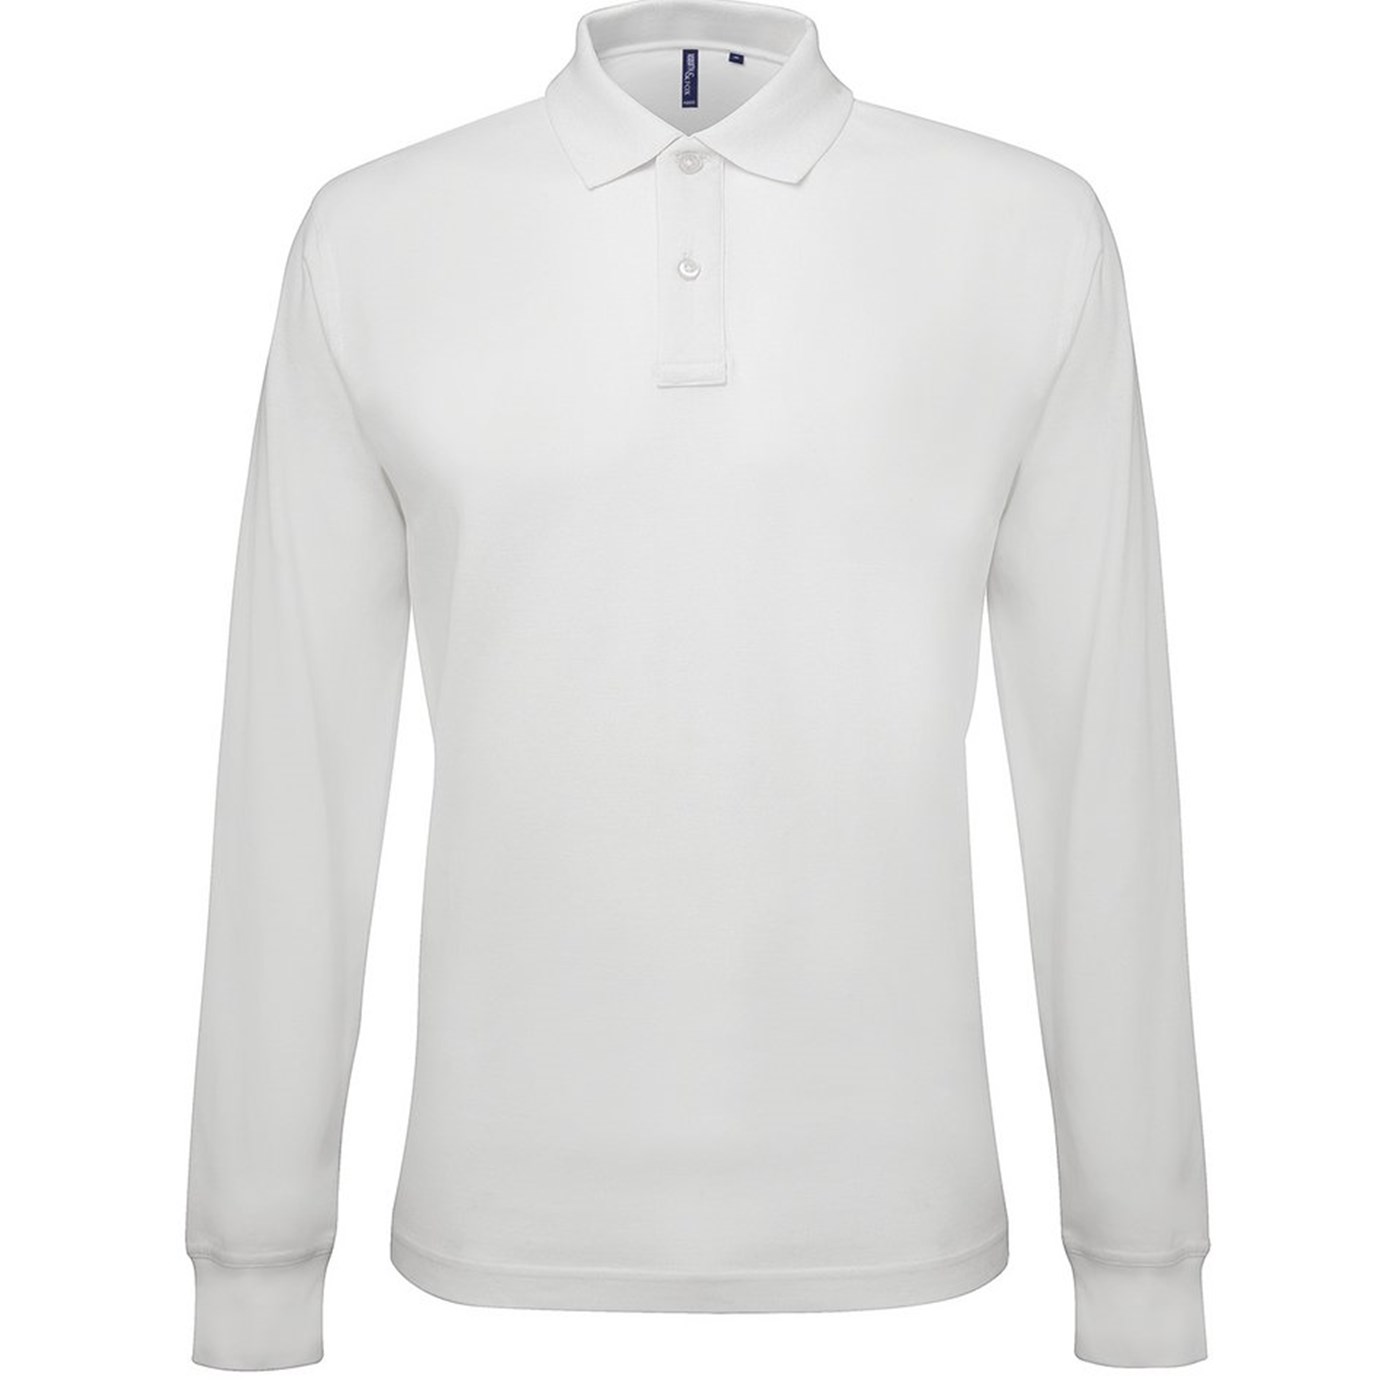 Asquith & Fox Men's Classic Fit Long Sleeve Polo Shirt